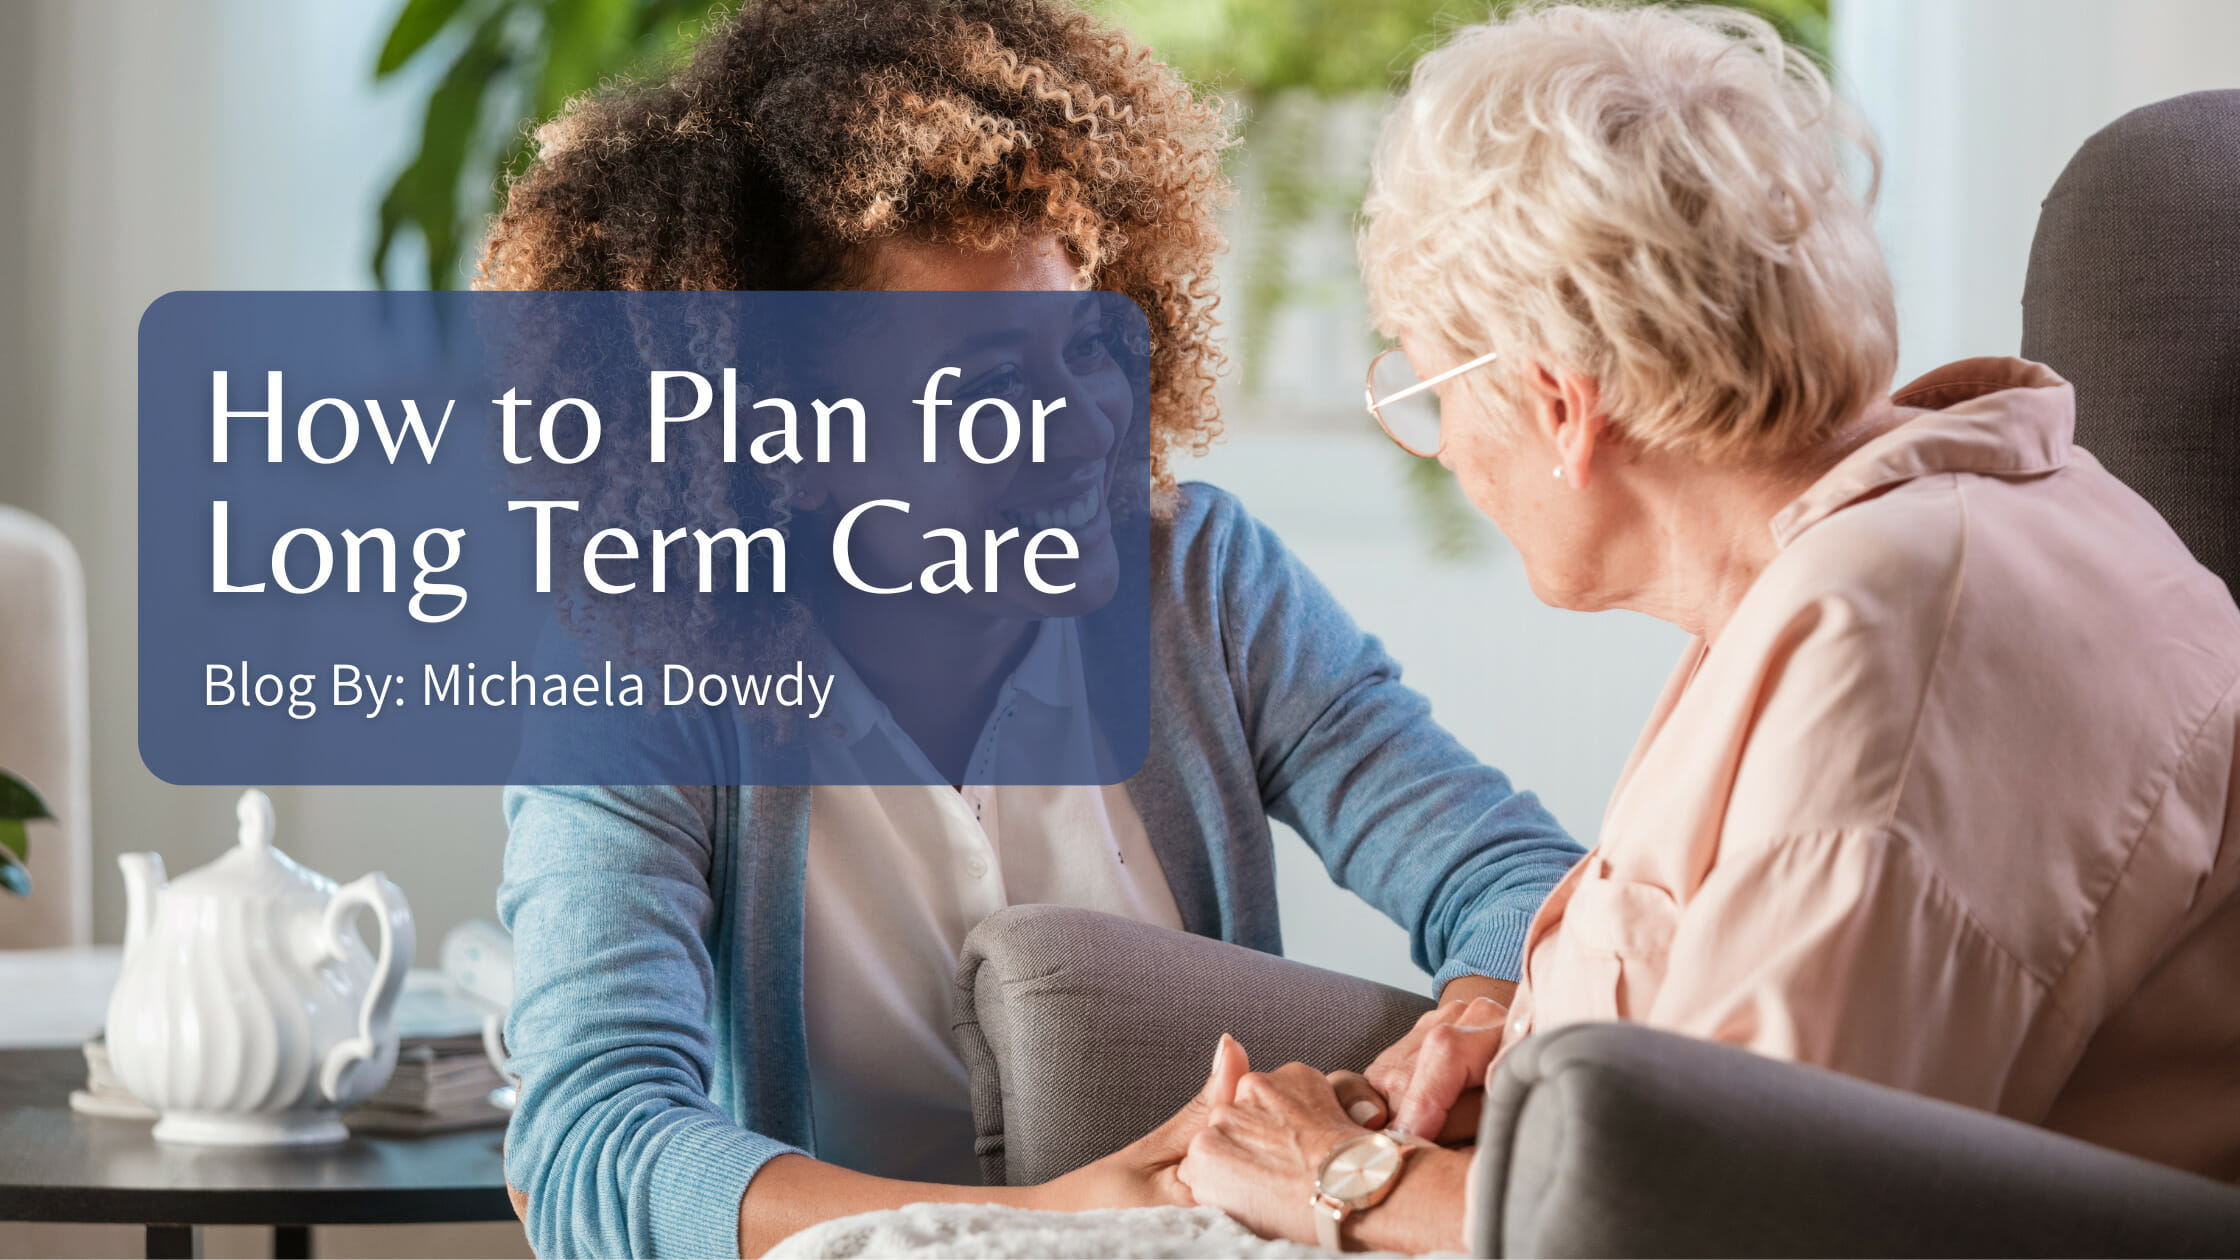 How to Plan for Long Term Care